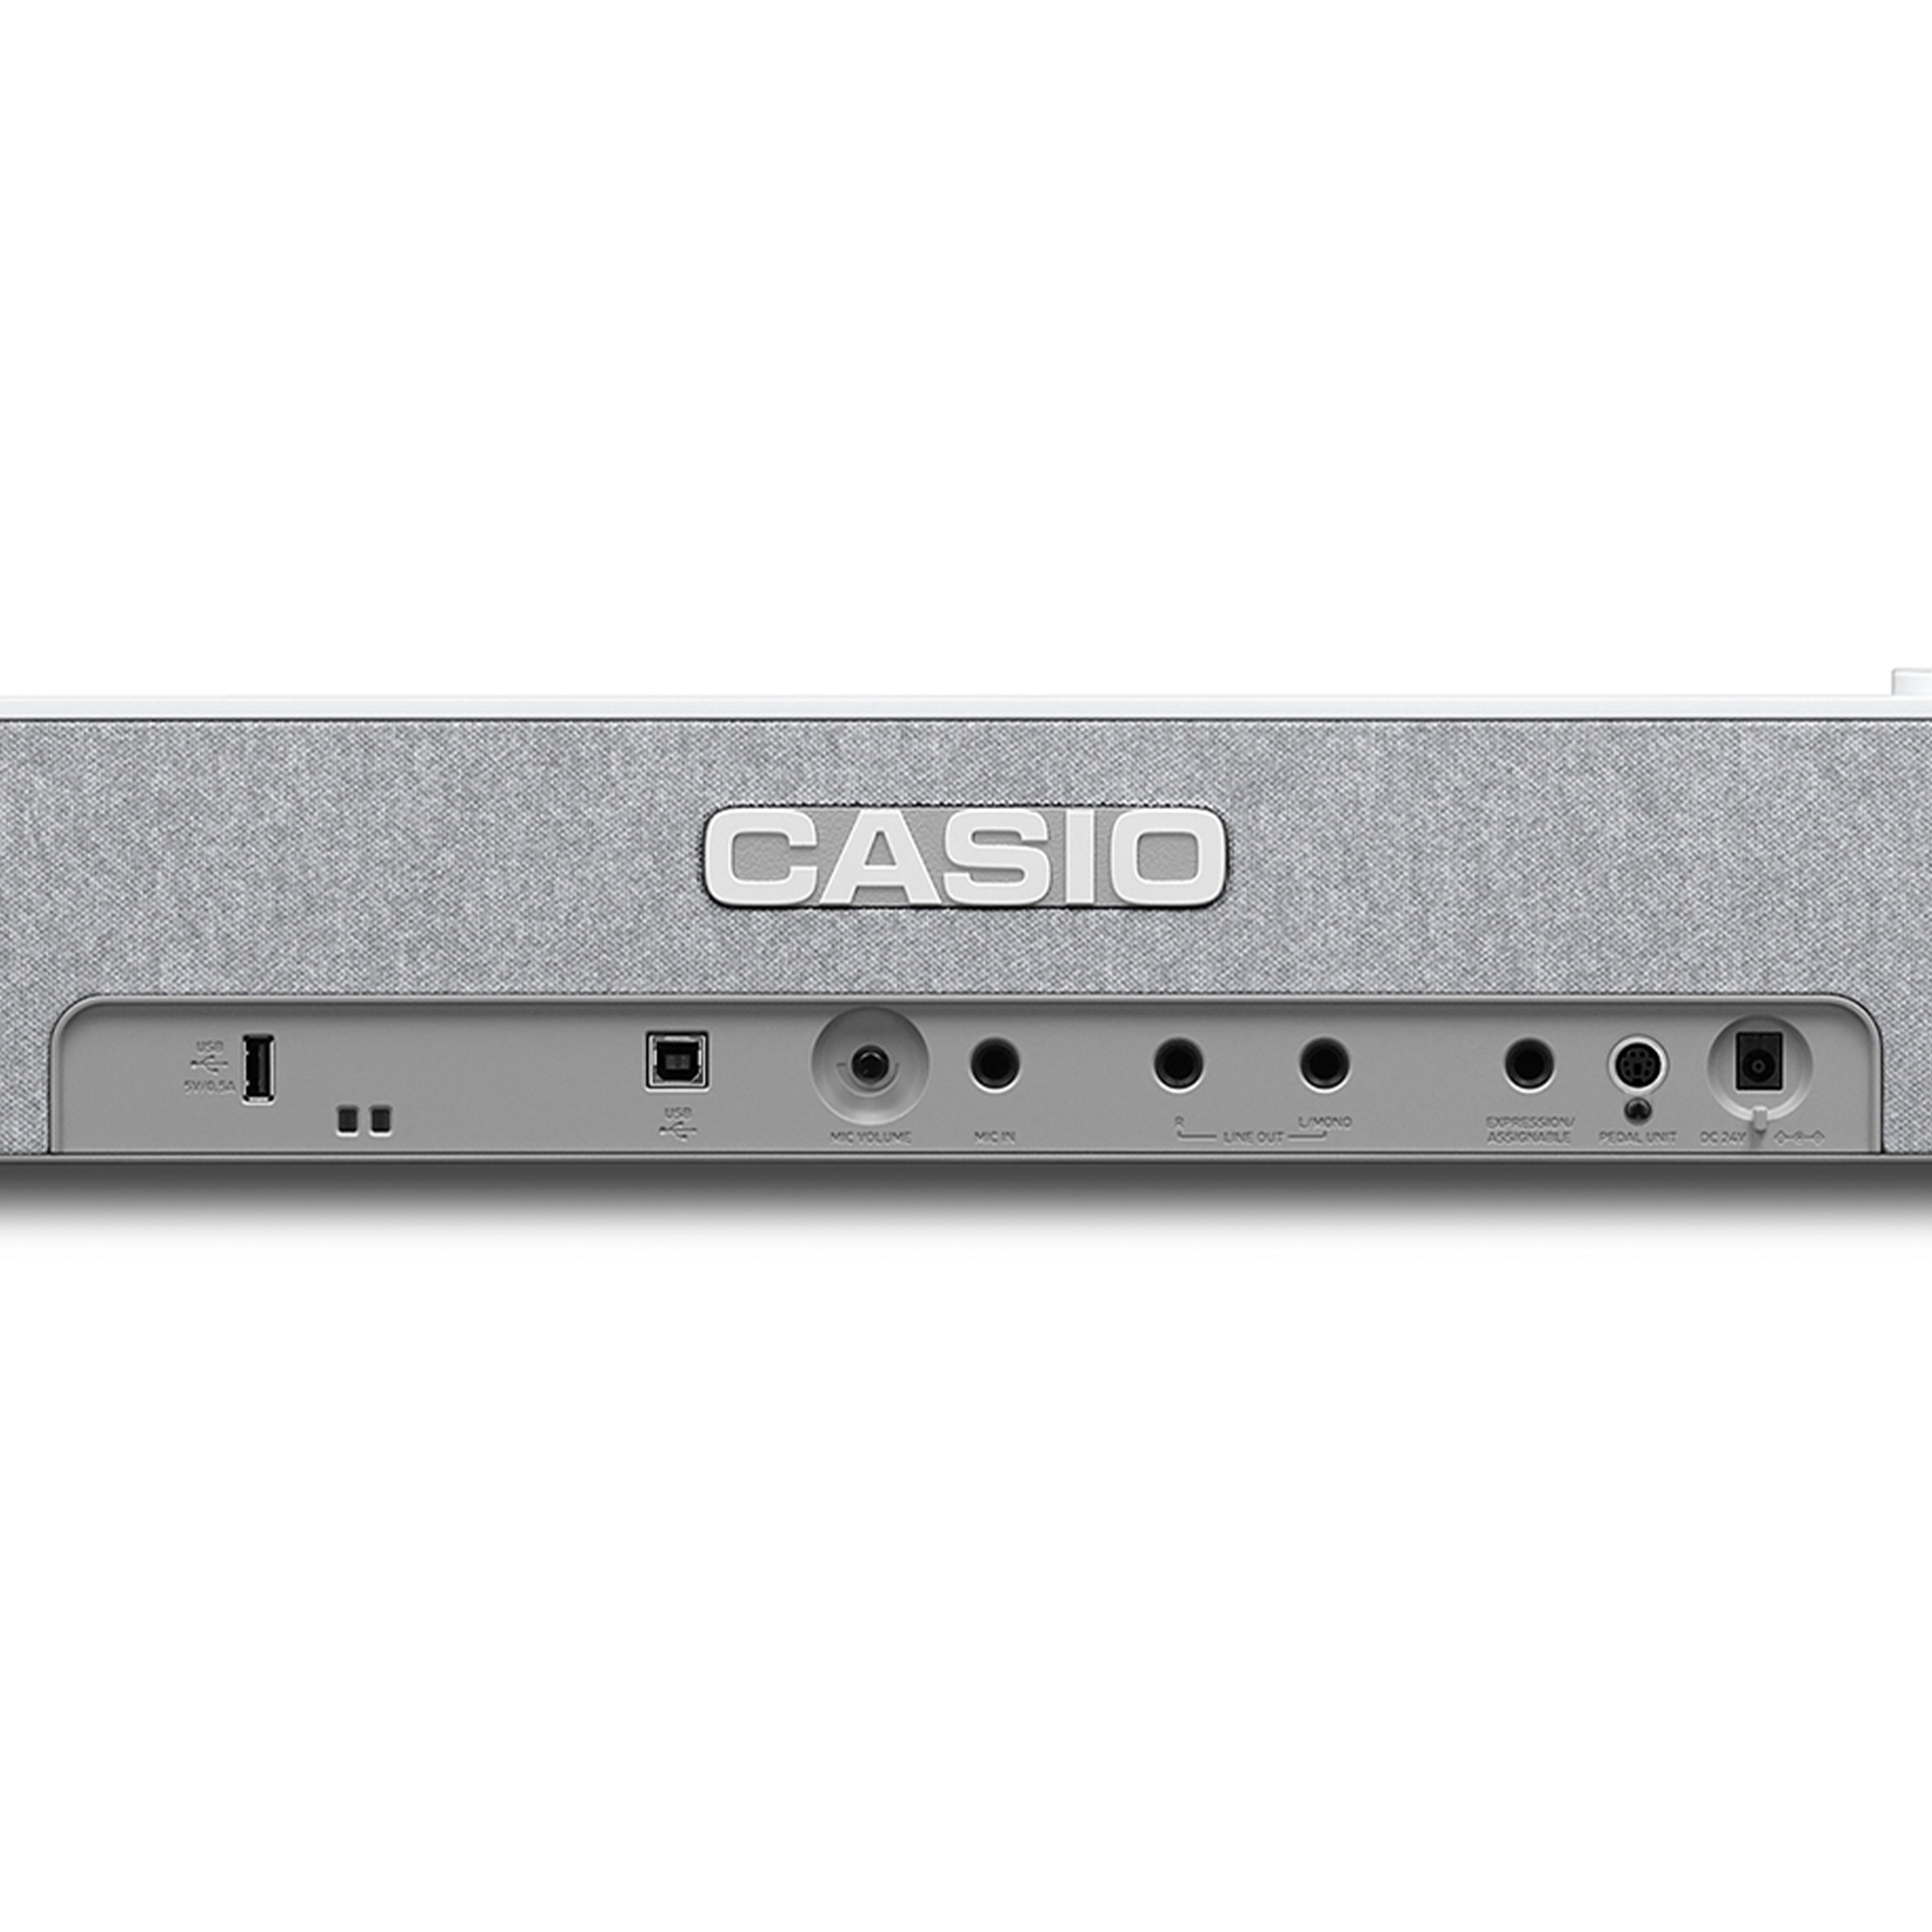 Casio PXS7000 Digital Piano - Back panel inputs and outputs